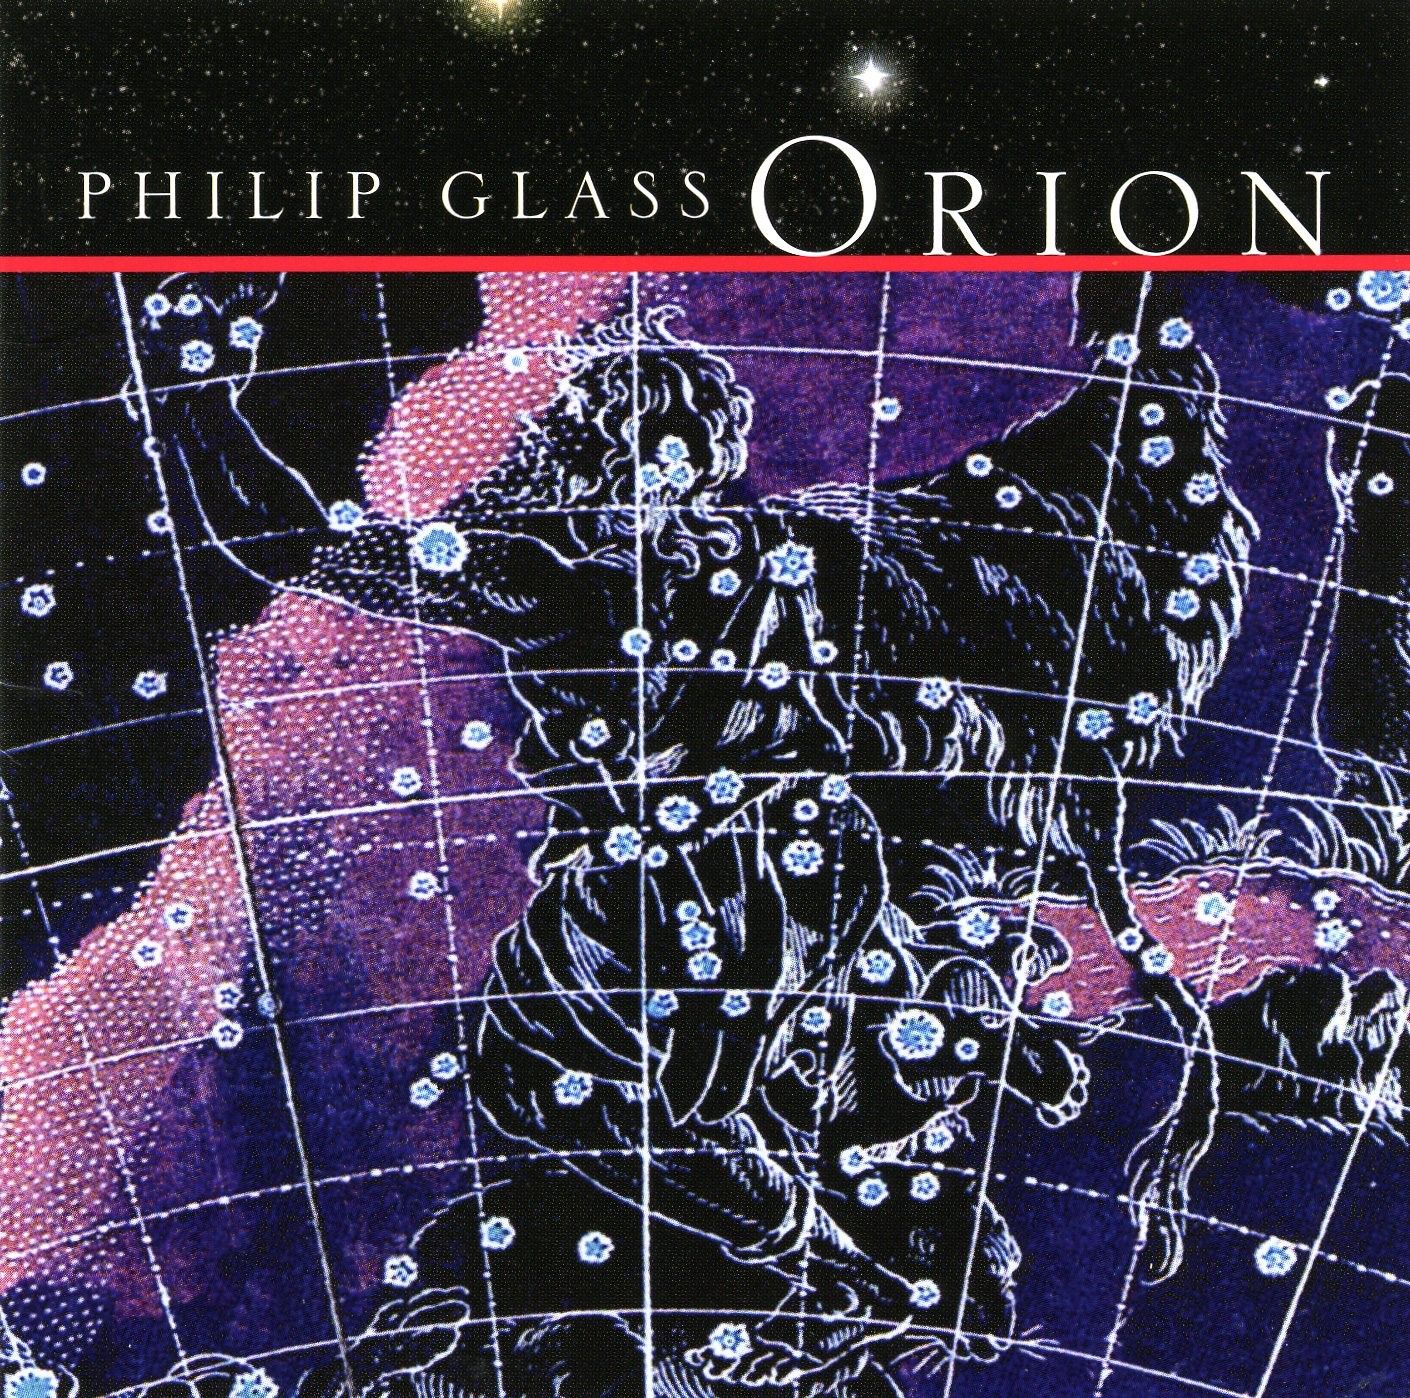 Glass: Orion